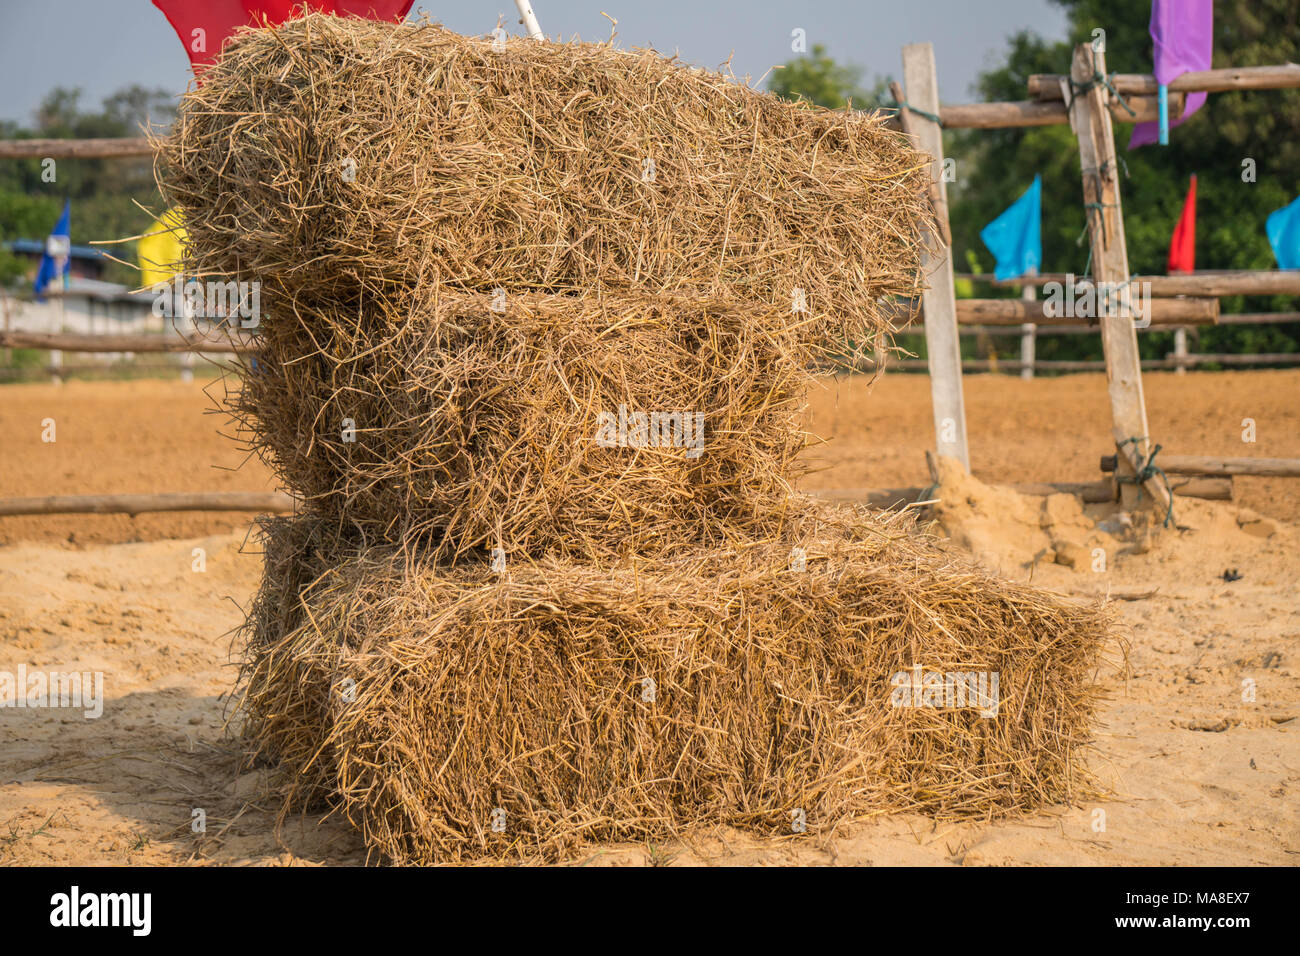 A wall of rectangular bales of straw stacked in a field before being transported to shelter Stock Photo